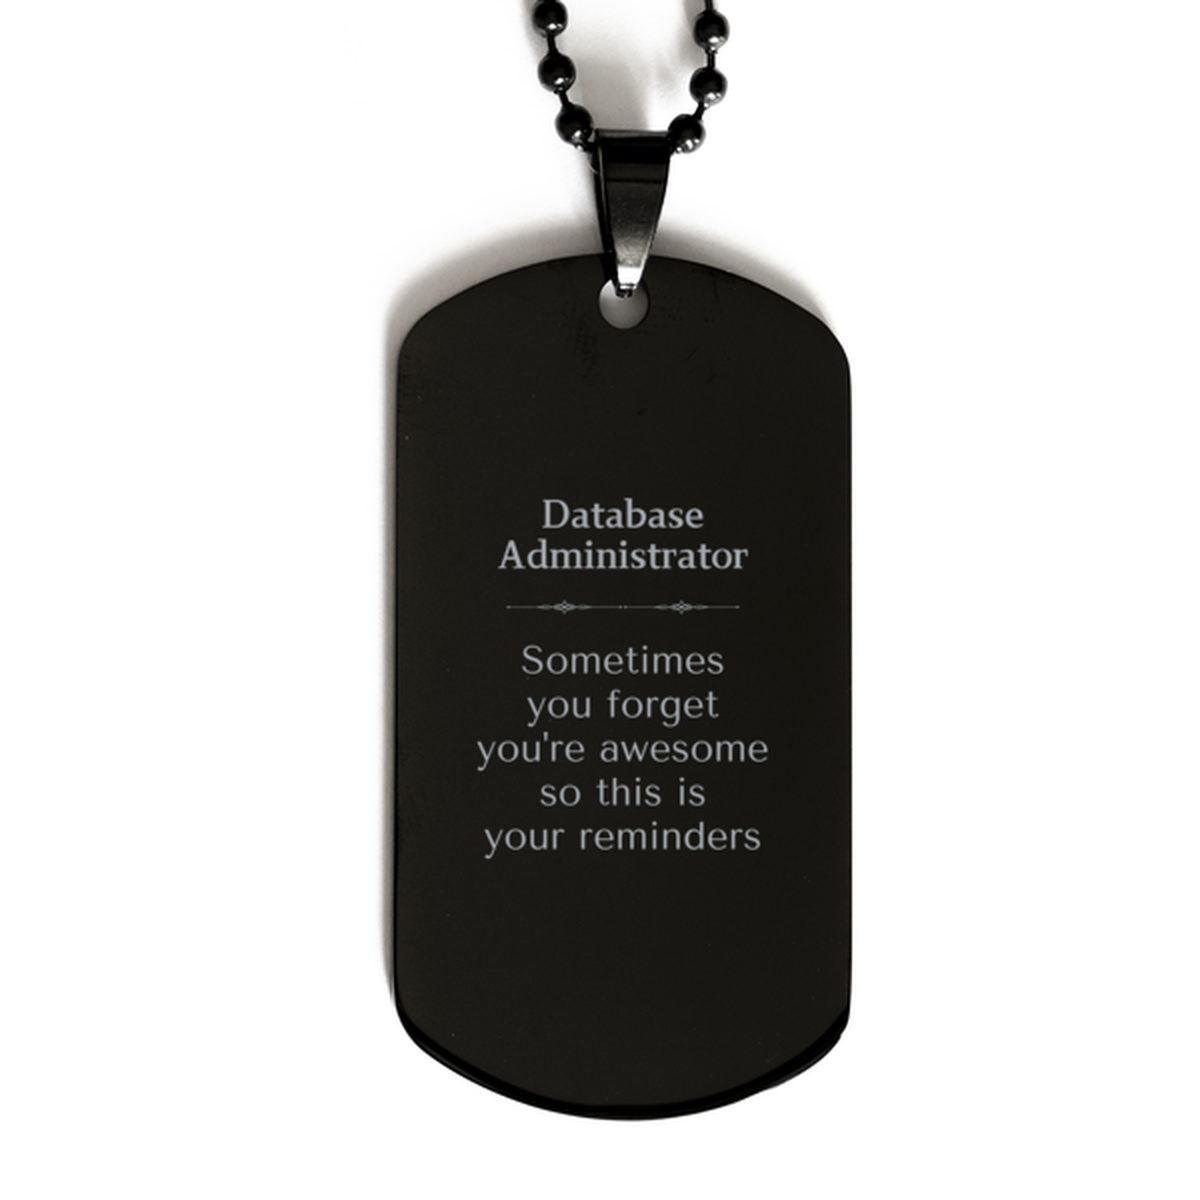 Sentimental Database Administrator Black Dog Tag, Database Administrator Sometimes you forget you're awesome so this is your reminders, Graduation Christmas Birthday Gifts for Database Administrator, Men, Women, Coworkers